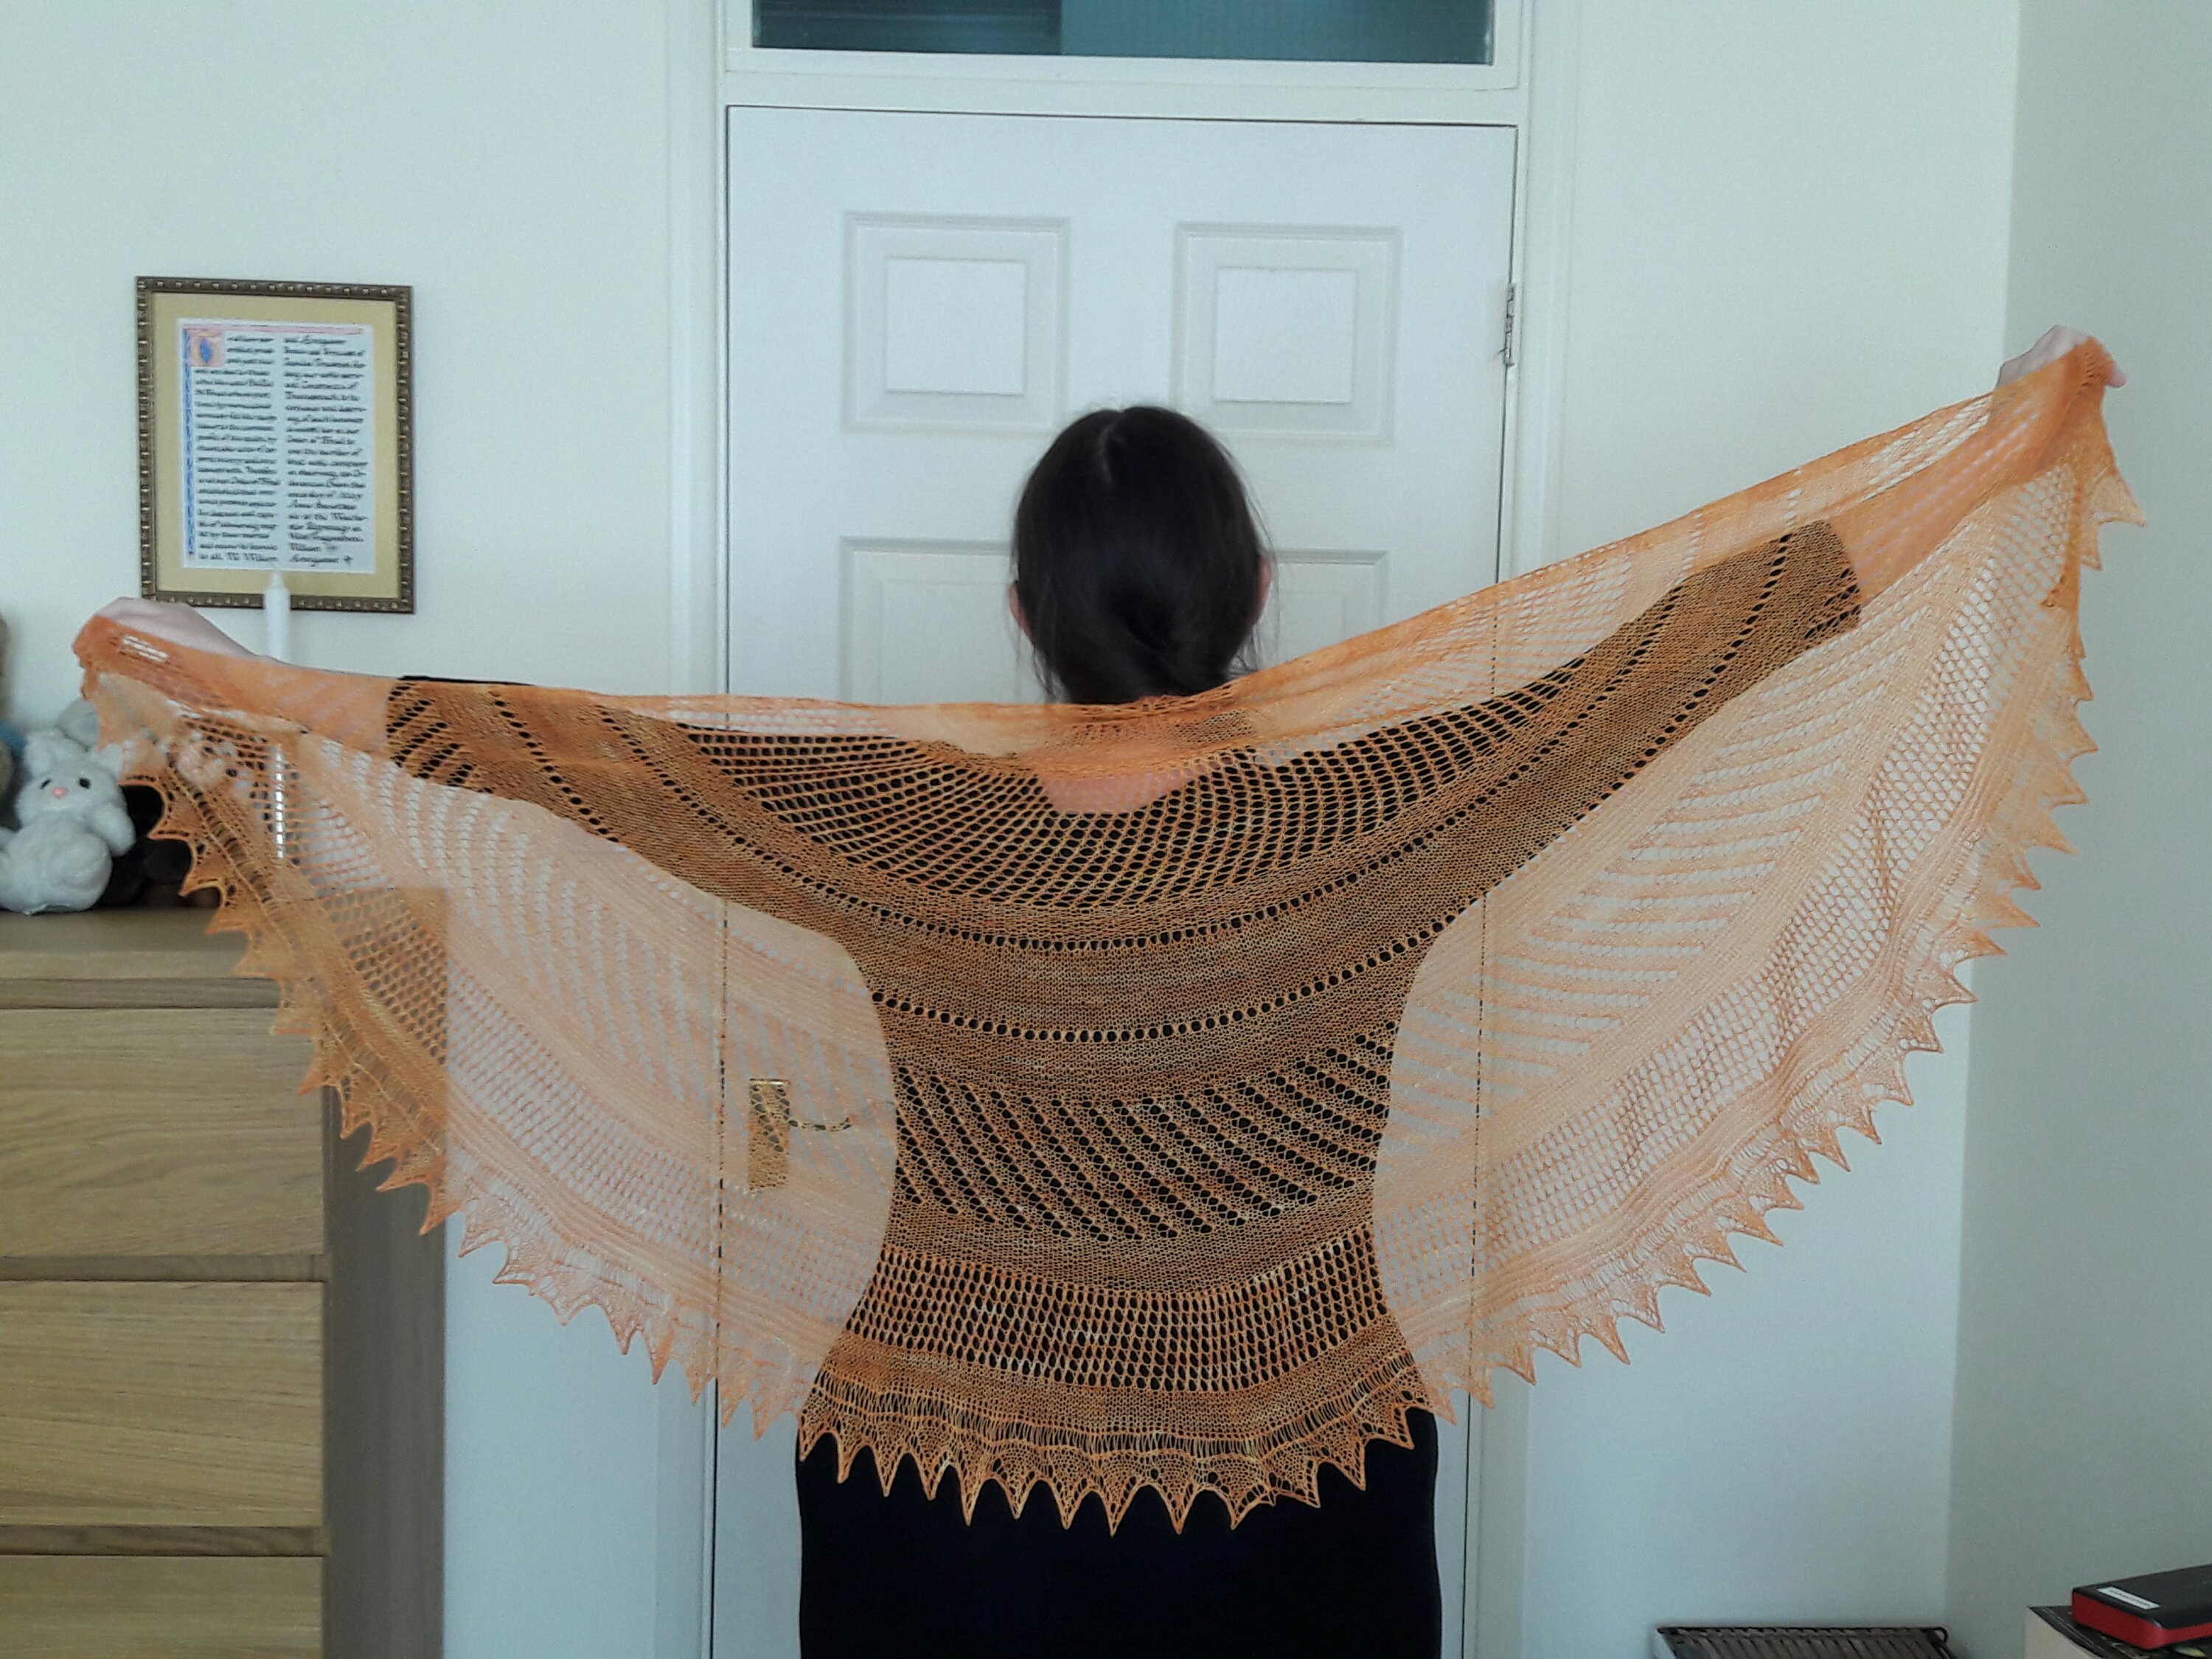 photo of completed shawl being held up by outstretched arms